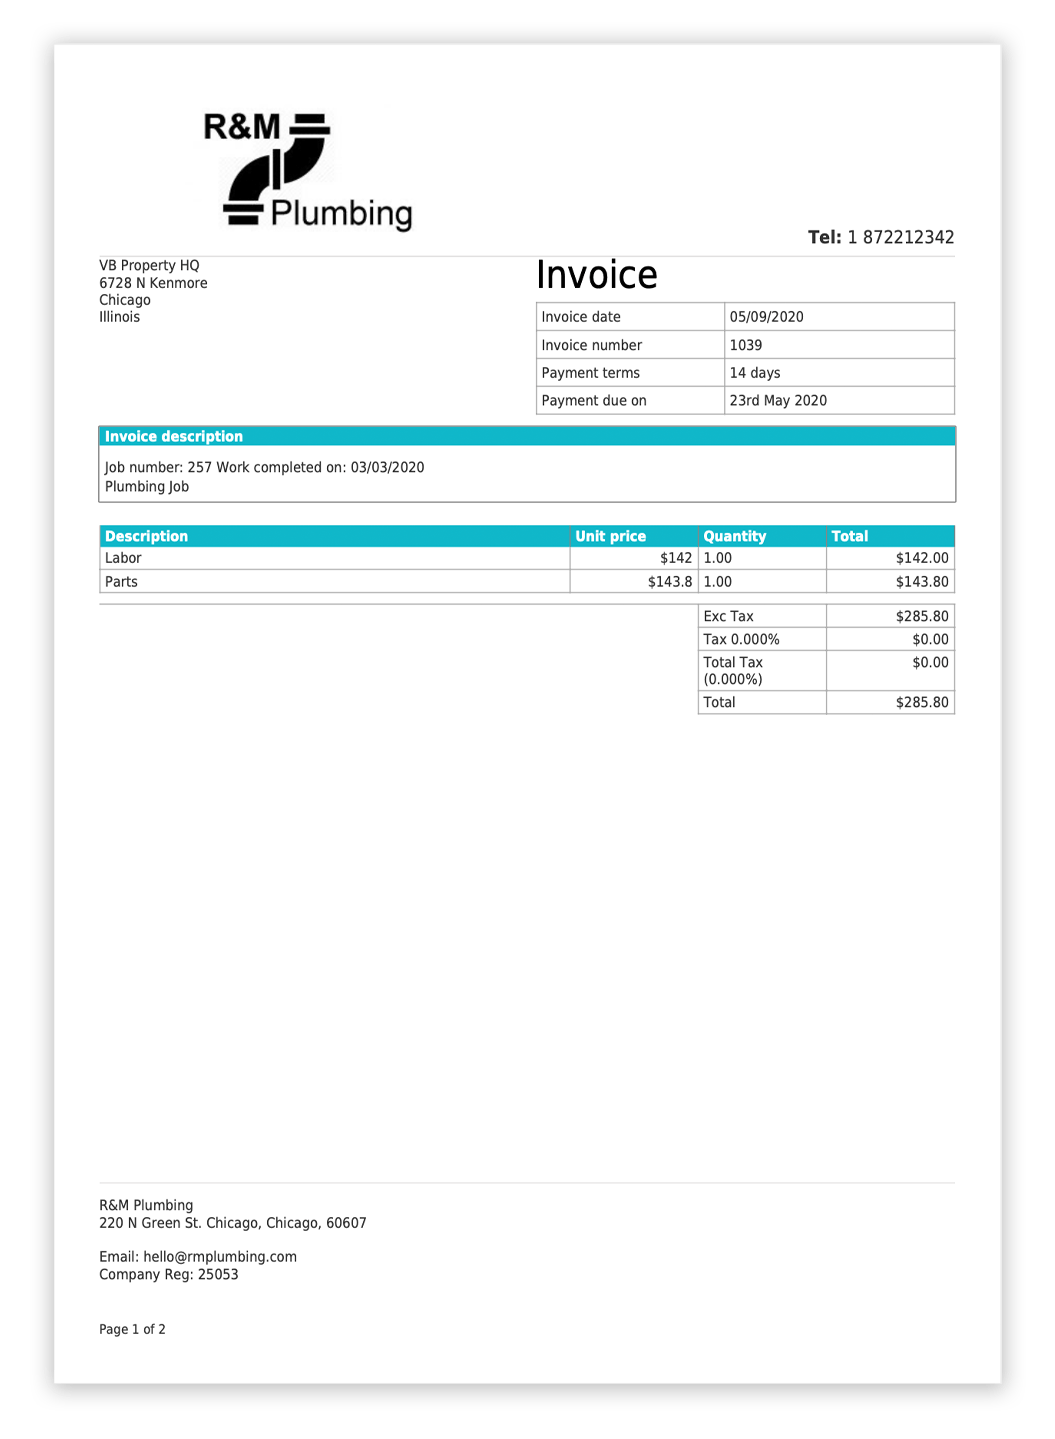 Invoicing example